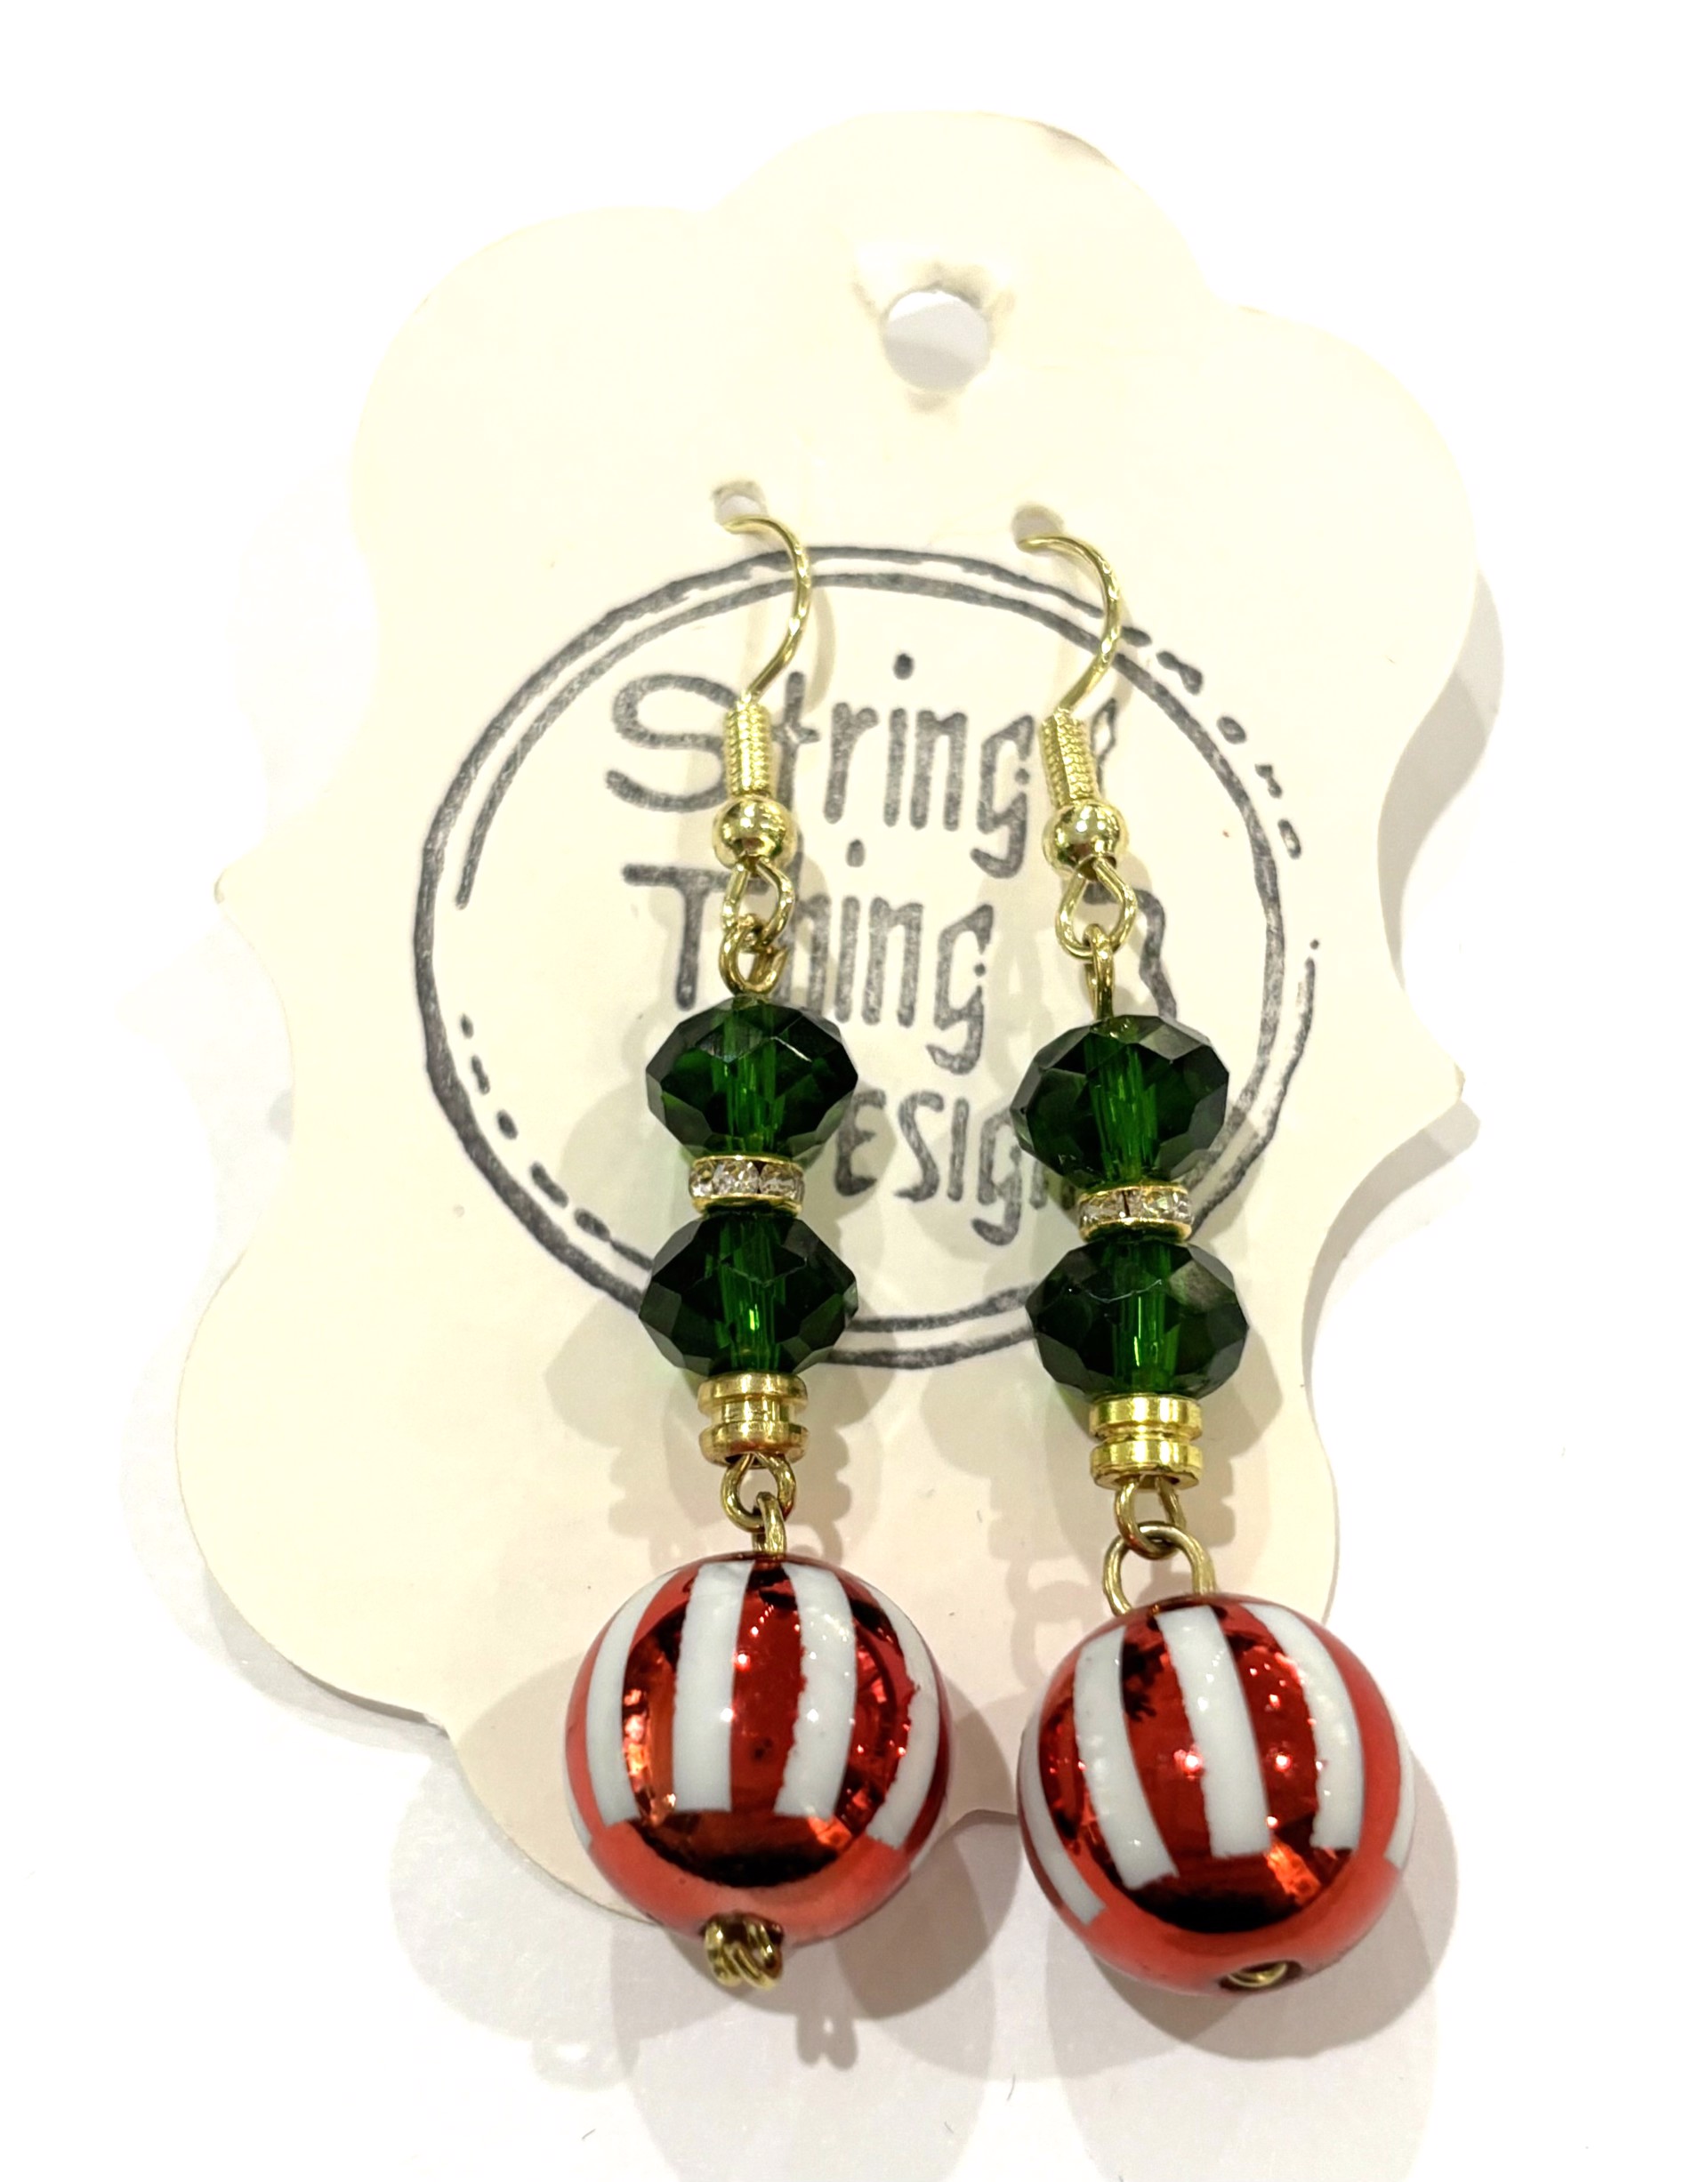 Red and Green Guitar String Earrings by String Thing Designs